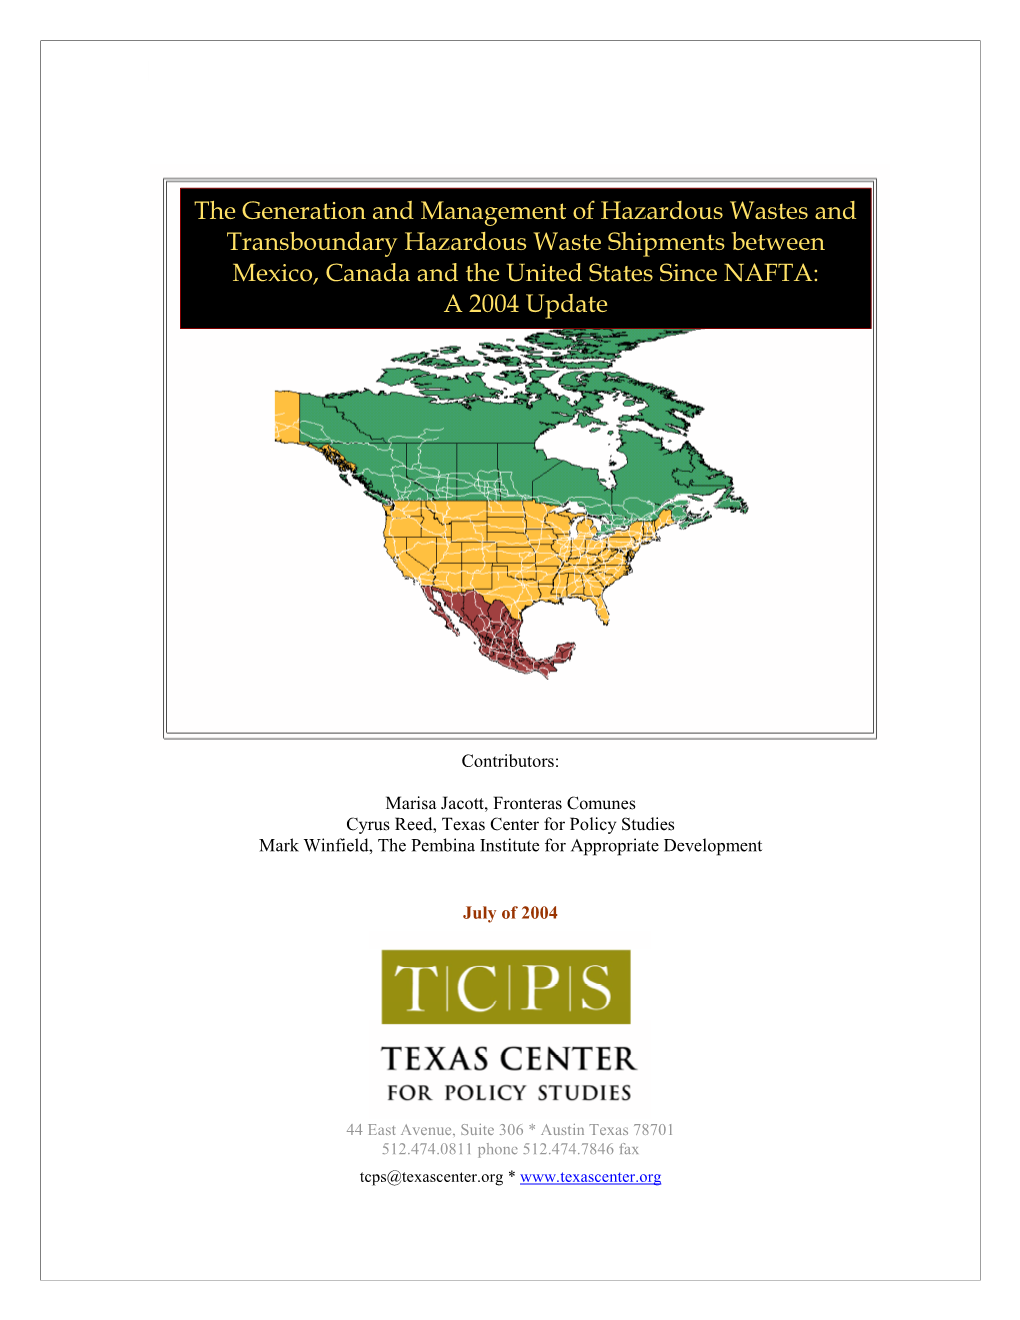 The Generation and Management of Hazardous Wastes and Transboundary Hazardous Waste Shipments Between Mexico, Canada and the United States Since NAFTA: a 2004 Update